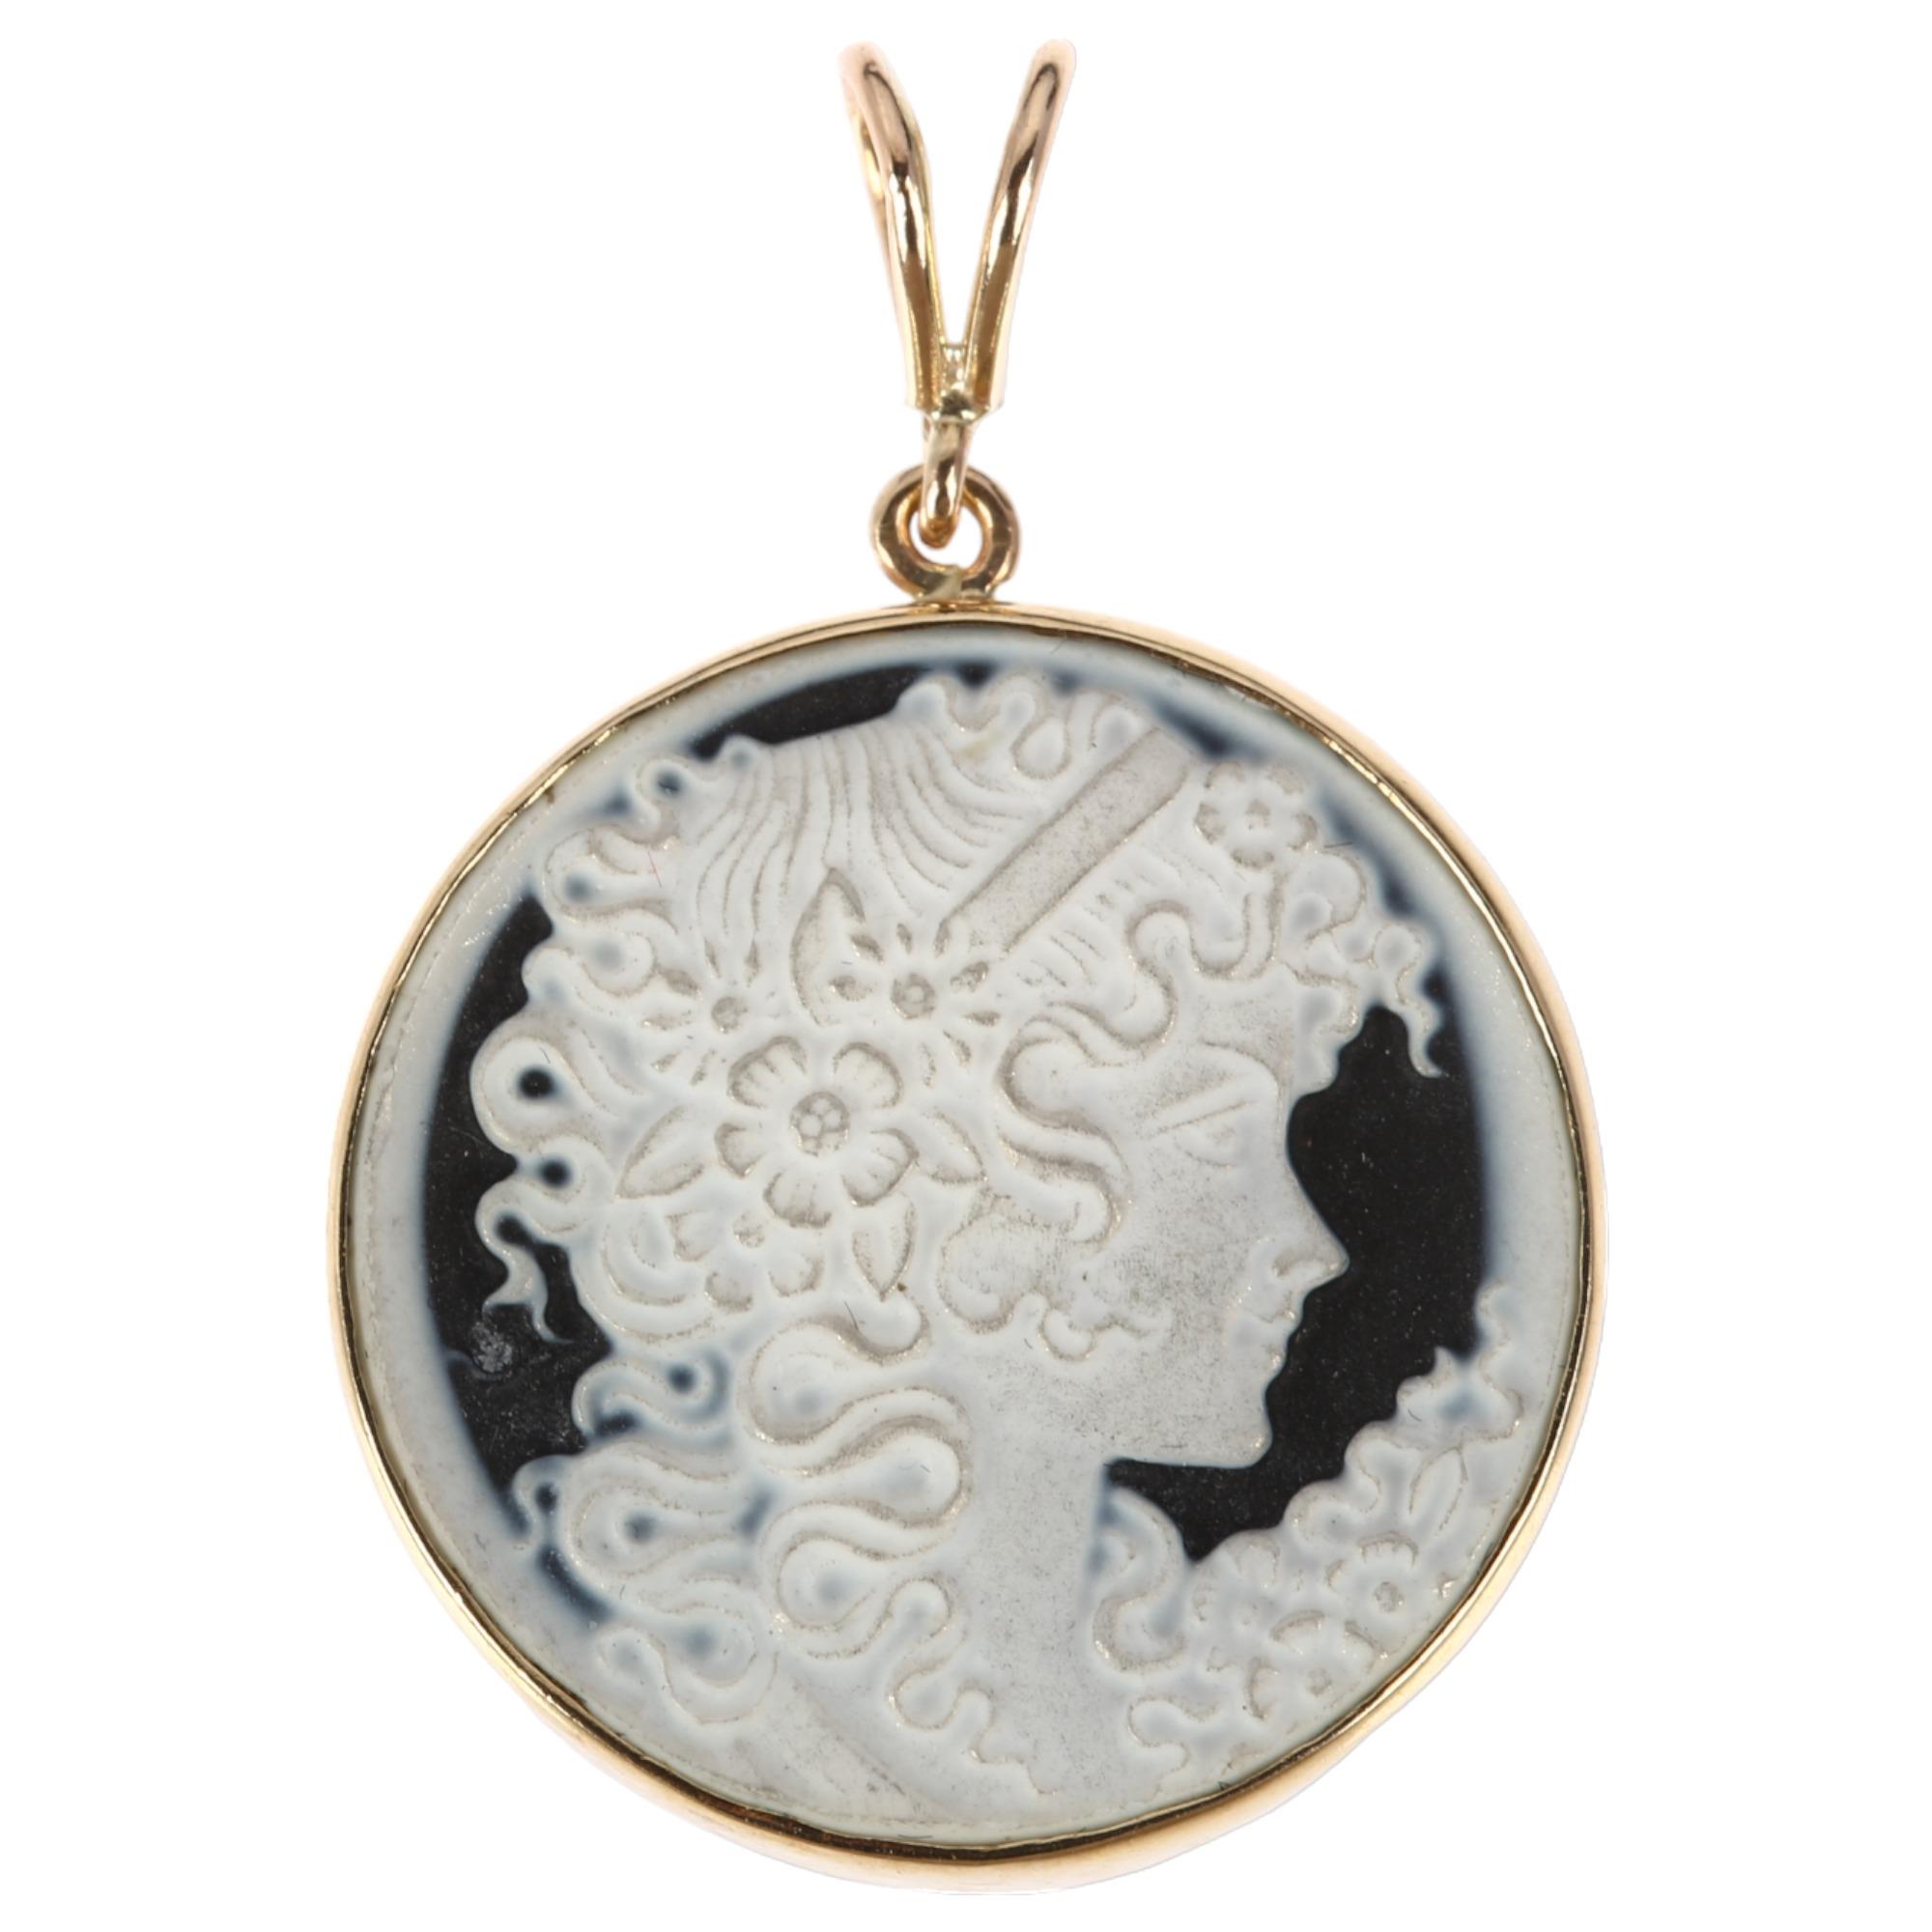 A late 20th century 9ct gold black glass cameo pendant, relief moulded depicting Art Nouveau